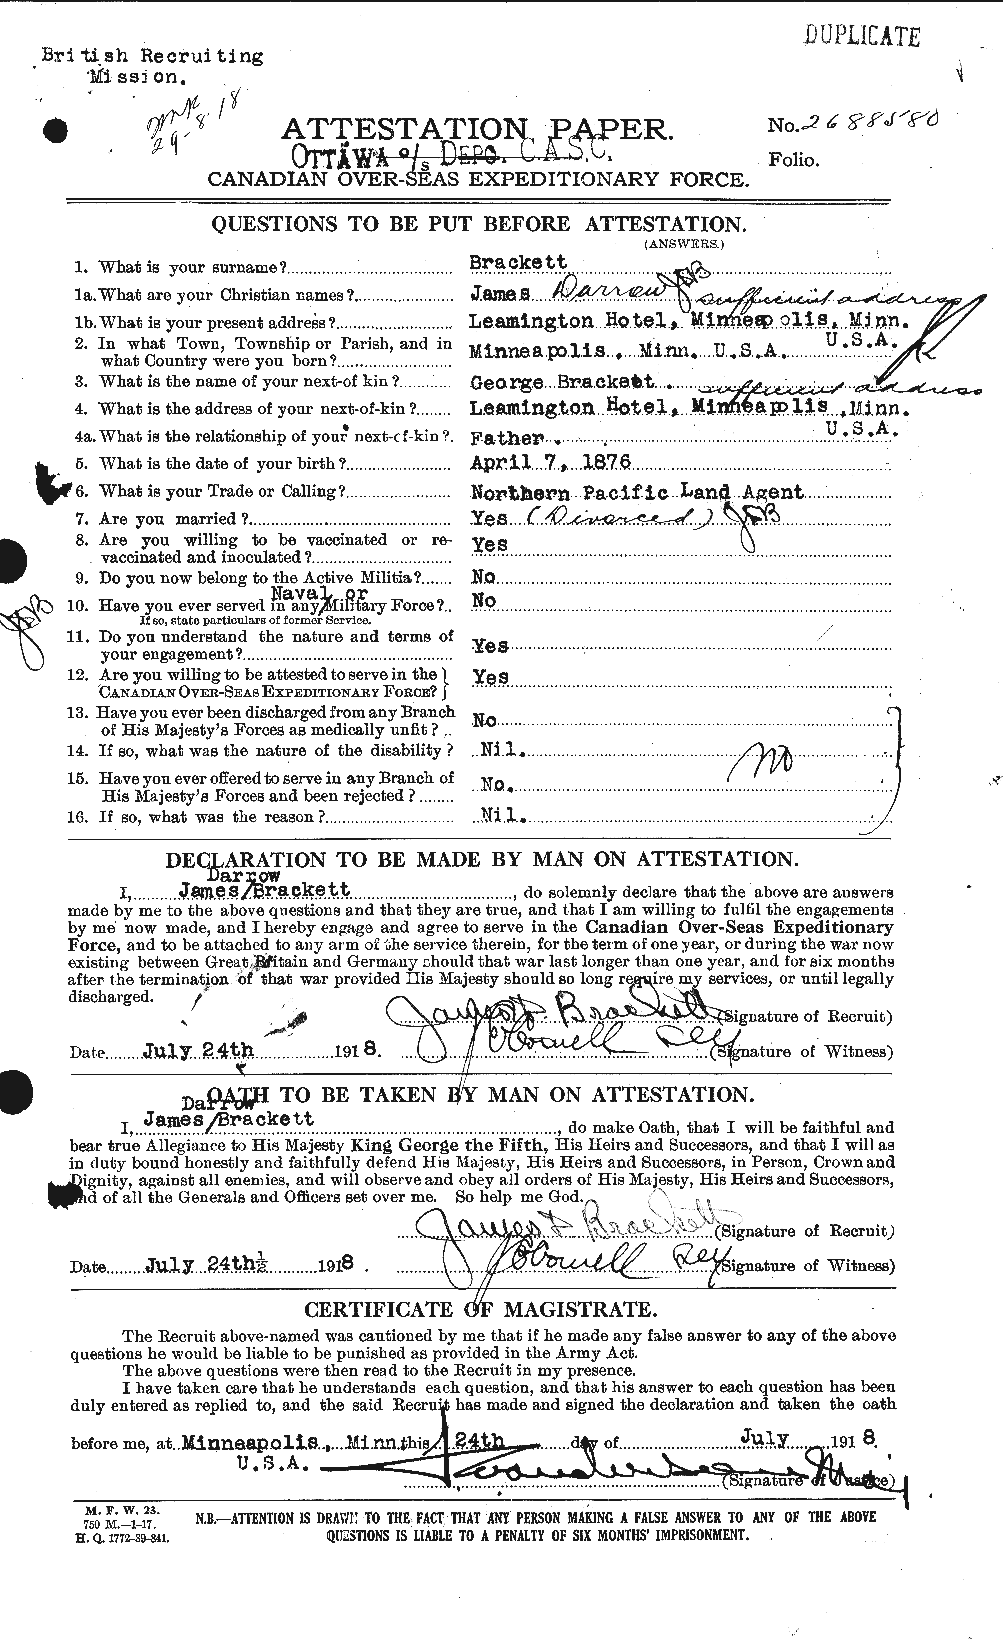 Personnel Records of the First World War - CEF 254734a